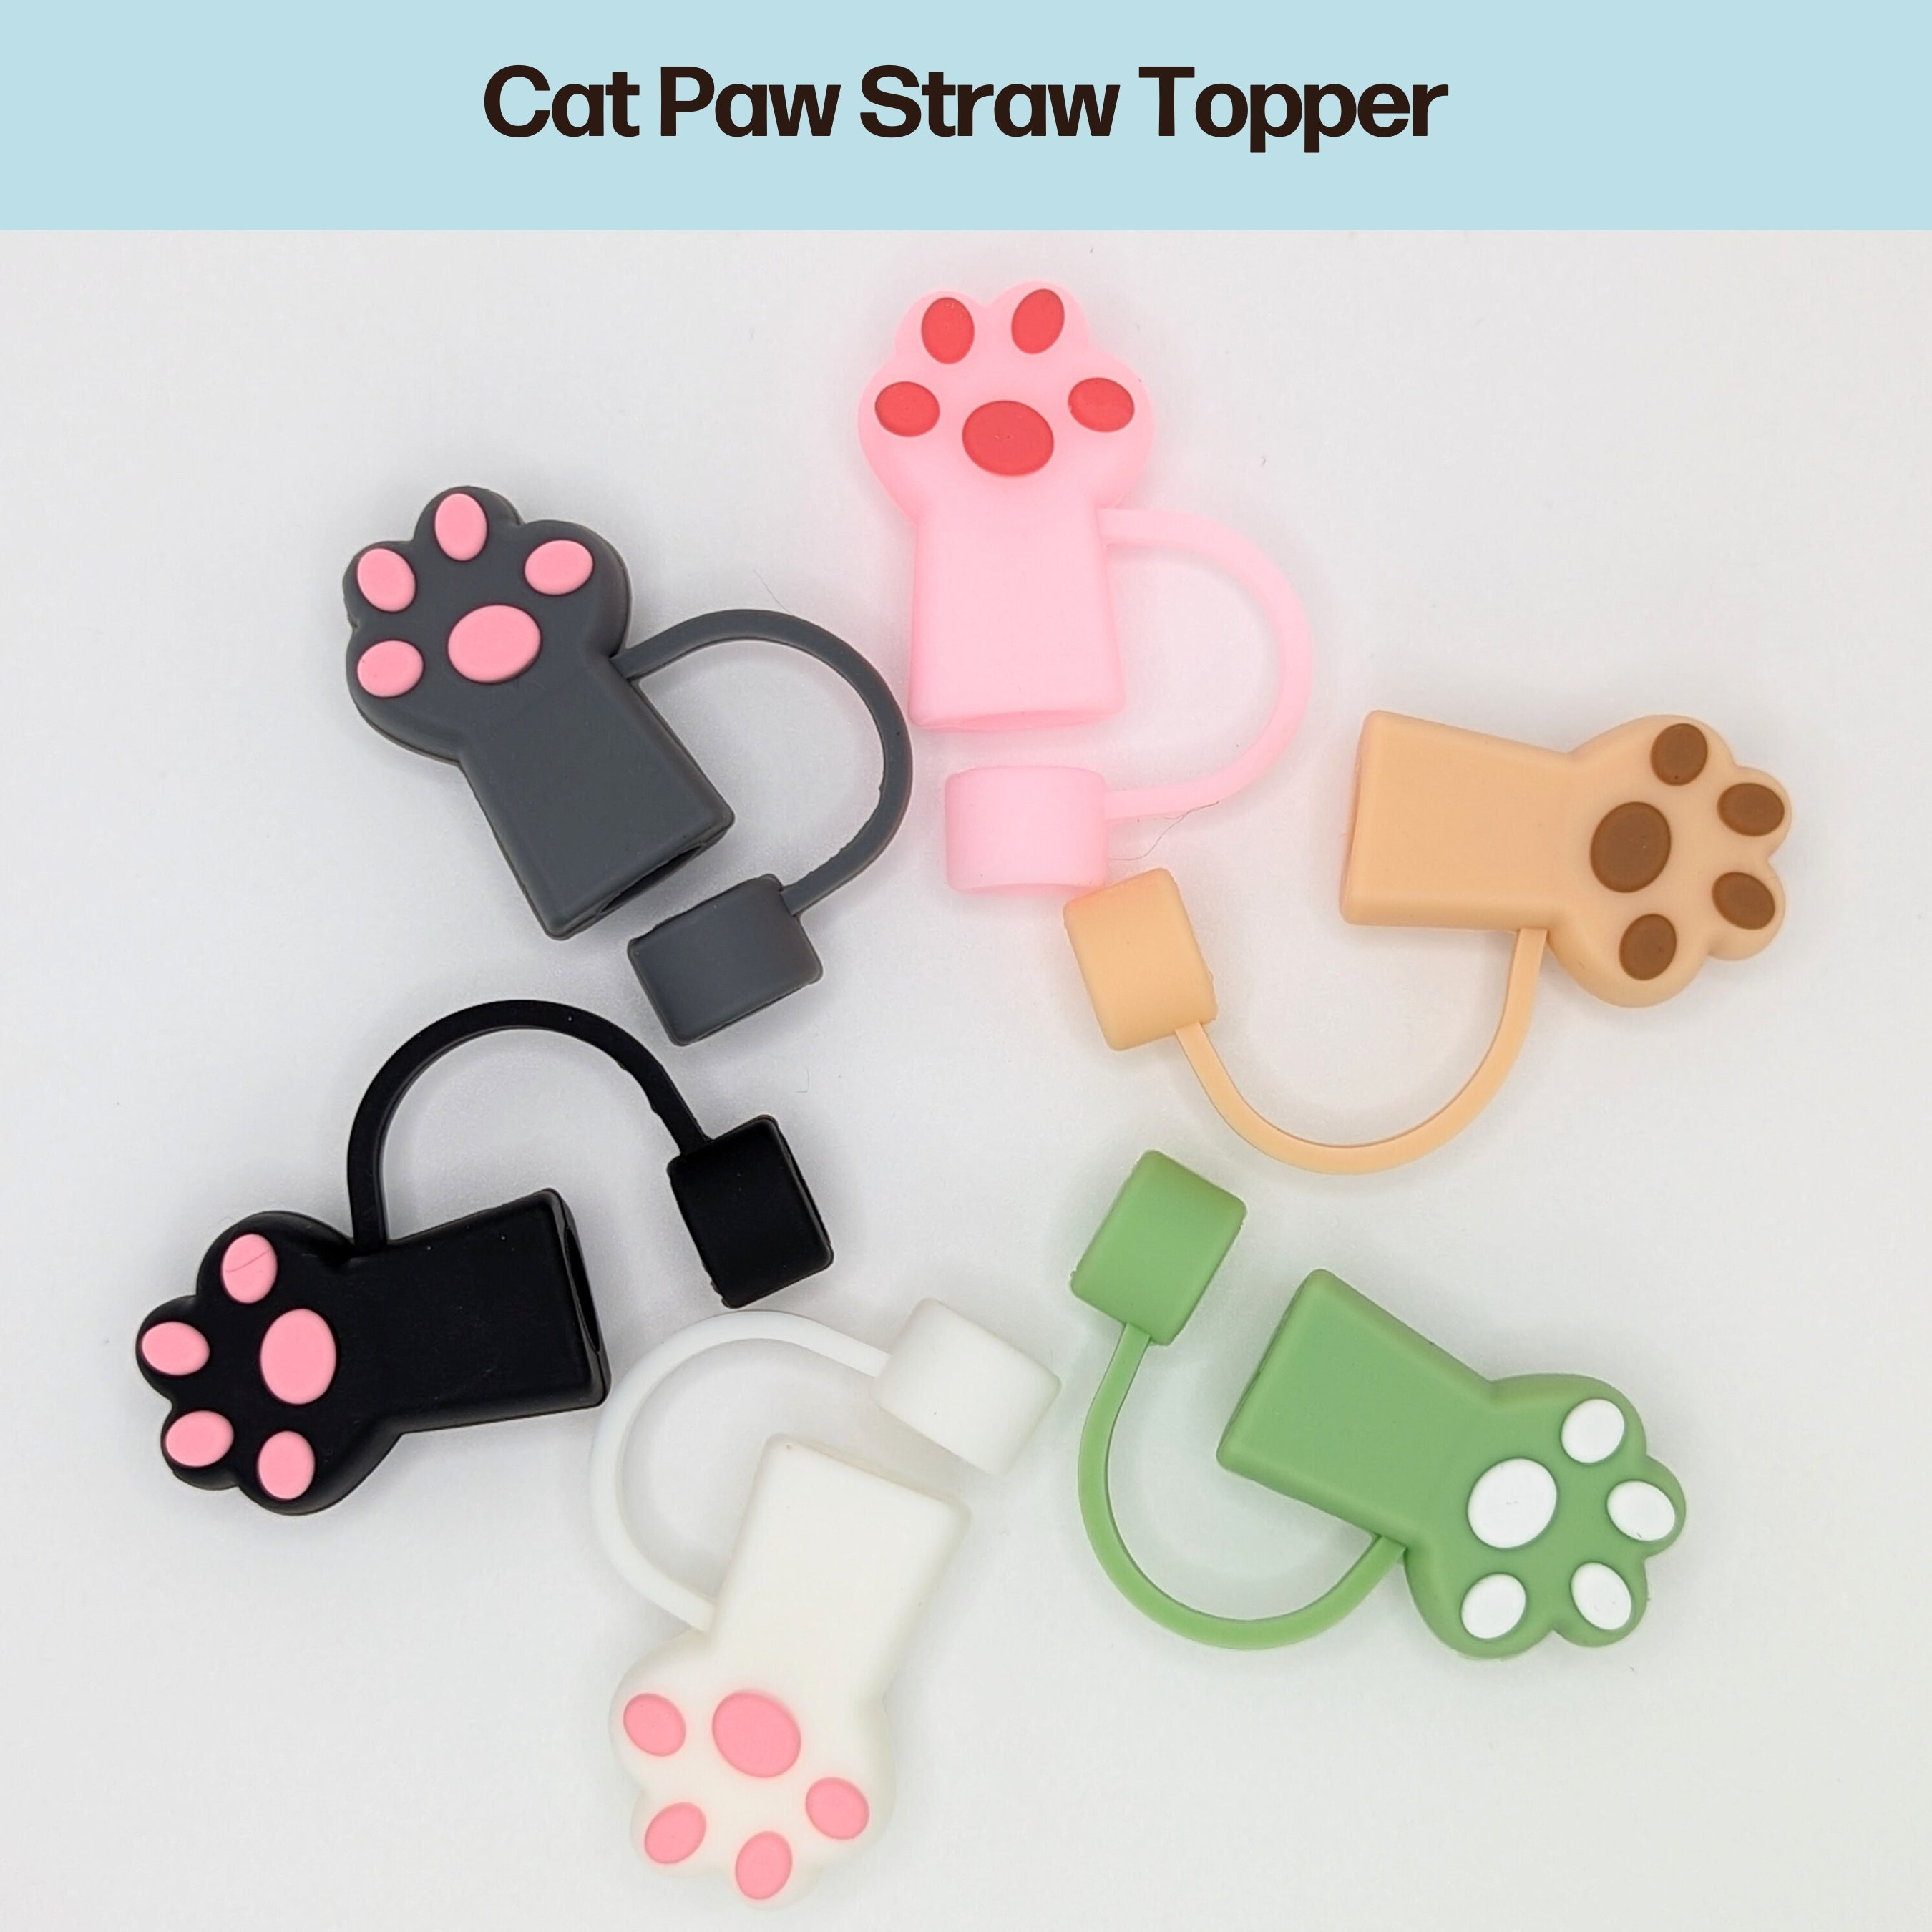 Cute Daisy Shaped Silicone Straw Toppers For 10mm Reusable Straws Silicone  Cap Straw Cover Straw Protector Fits Most Popular Brands Including Classic  Tumbler